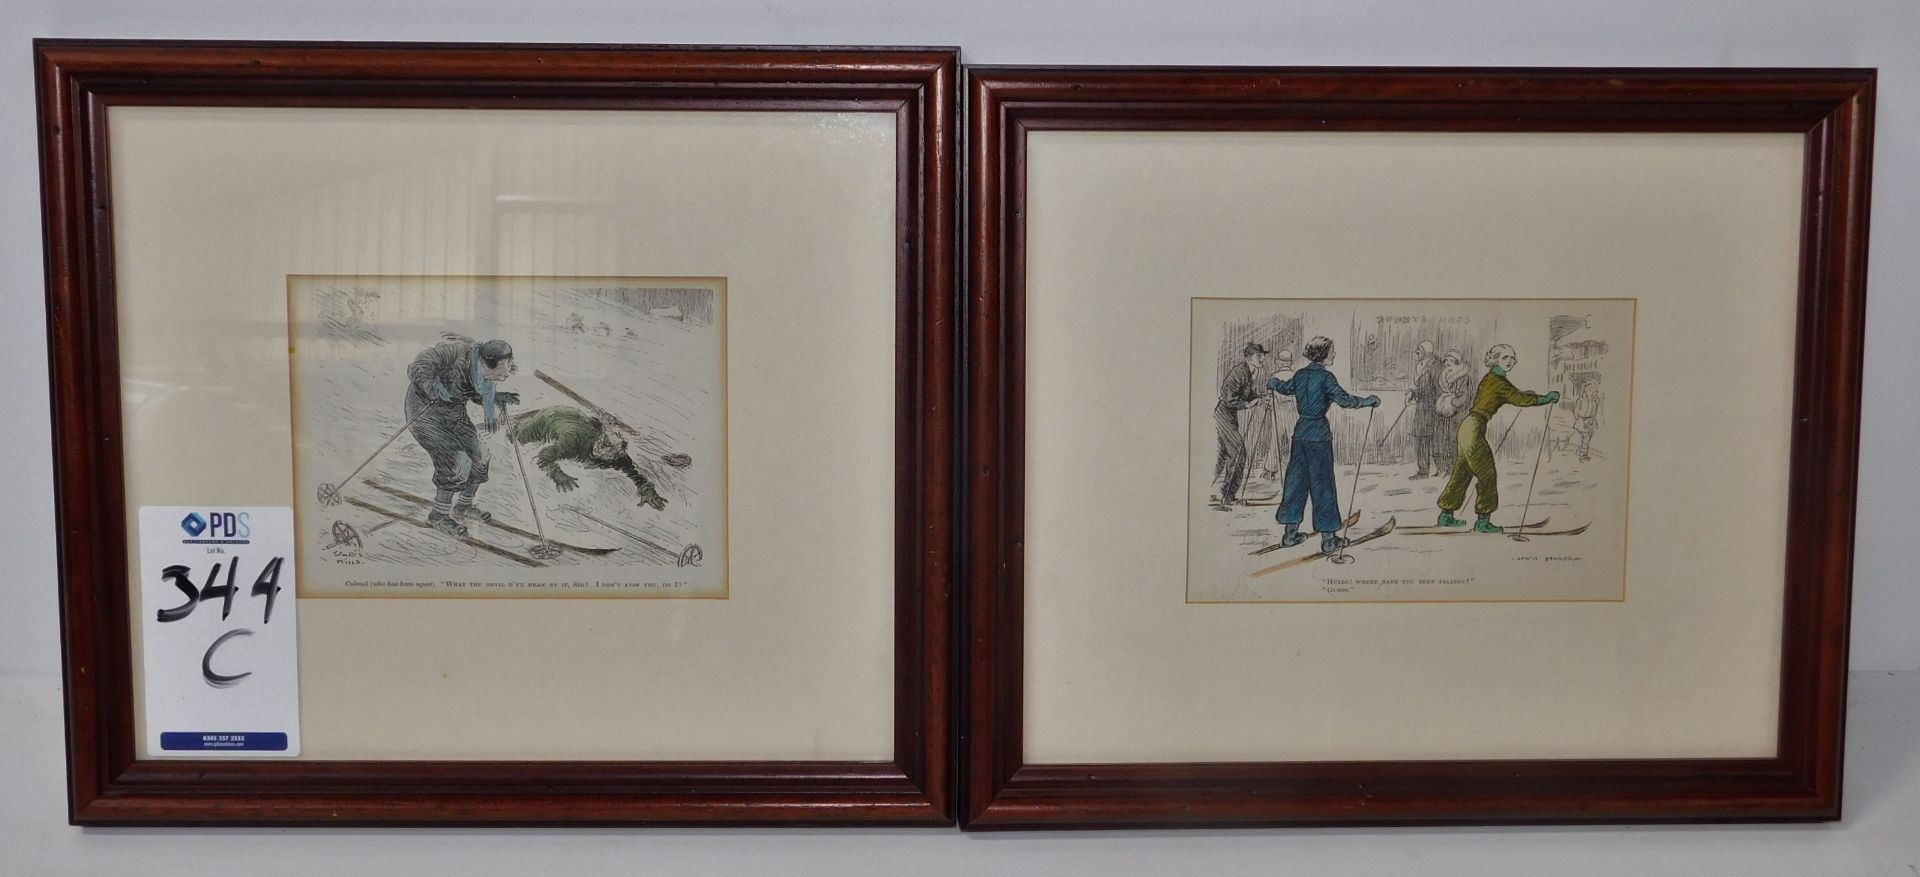 Pair of Hand Tinted Early 20th Century Prints Depicting Skiers (Location: Brentwood - See General